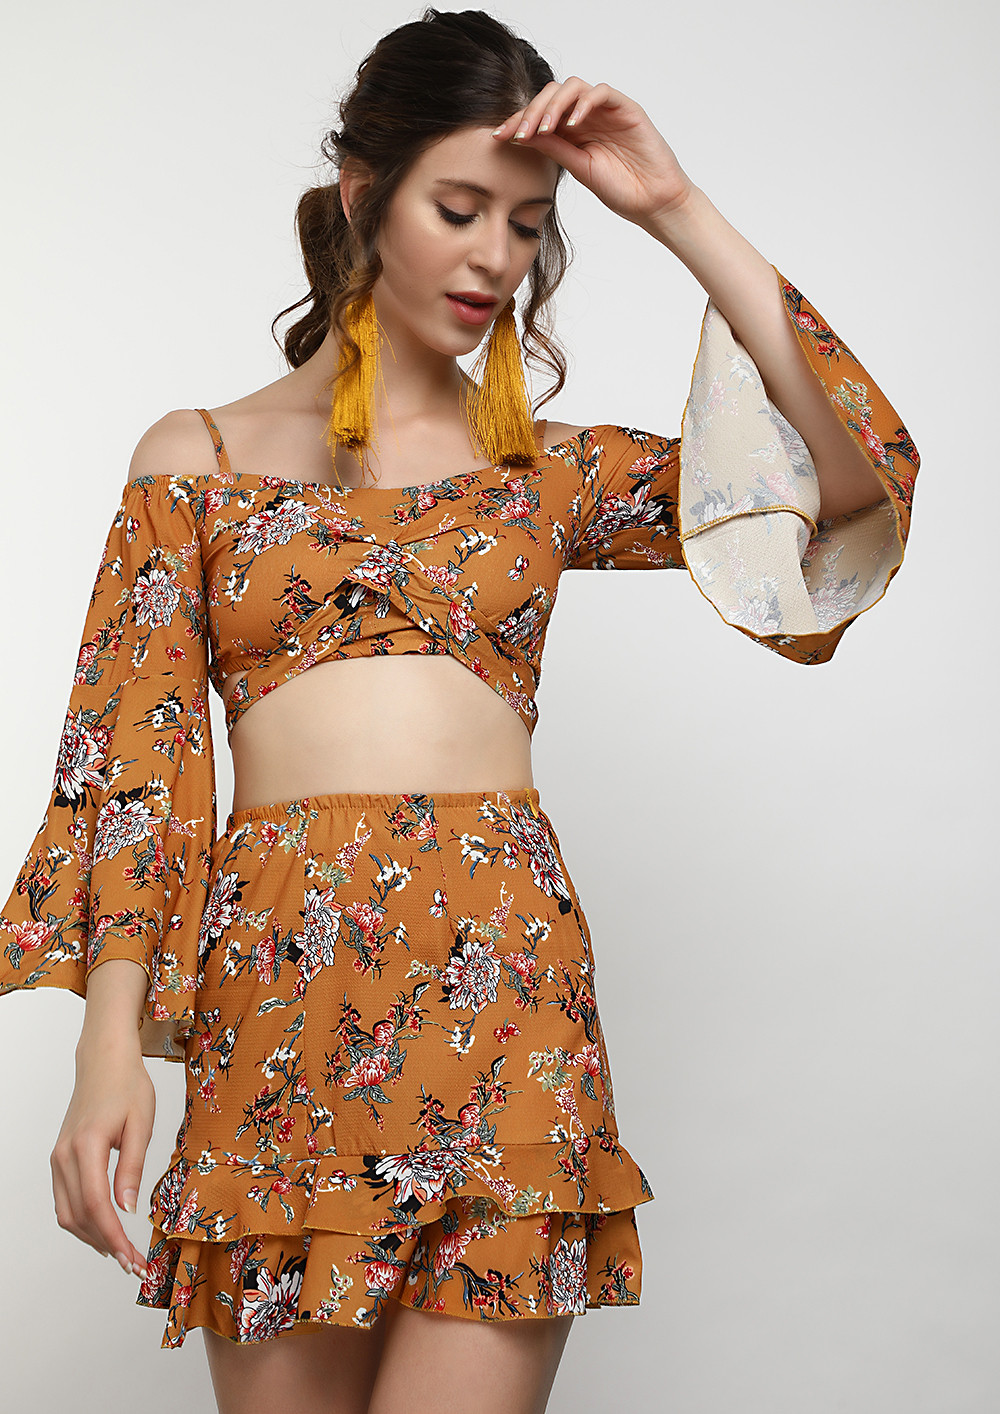 FROLICKING AROUND IN FLORALS YELLOW TWO PIECE